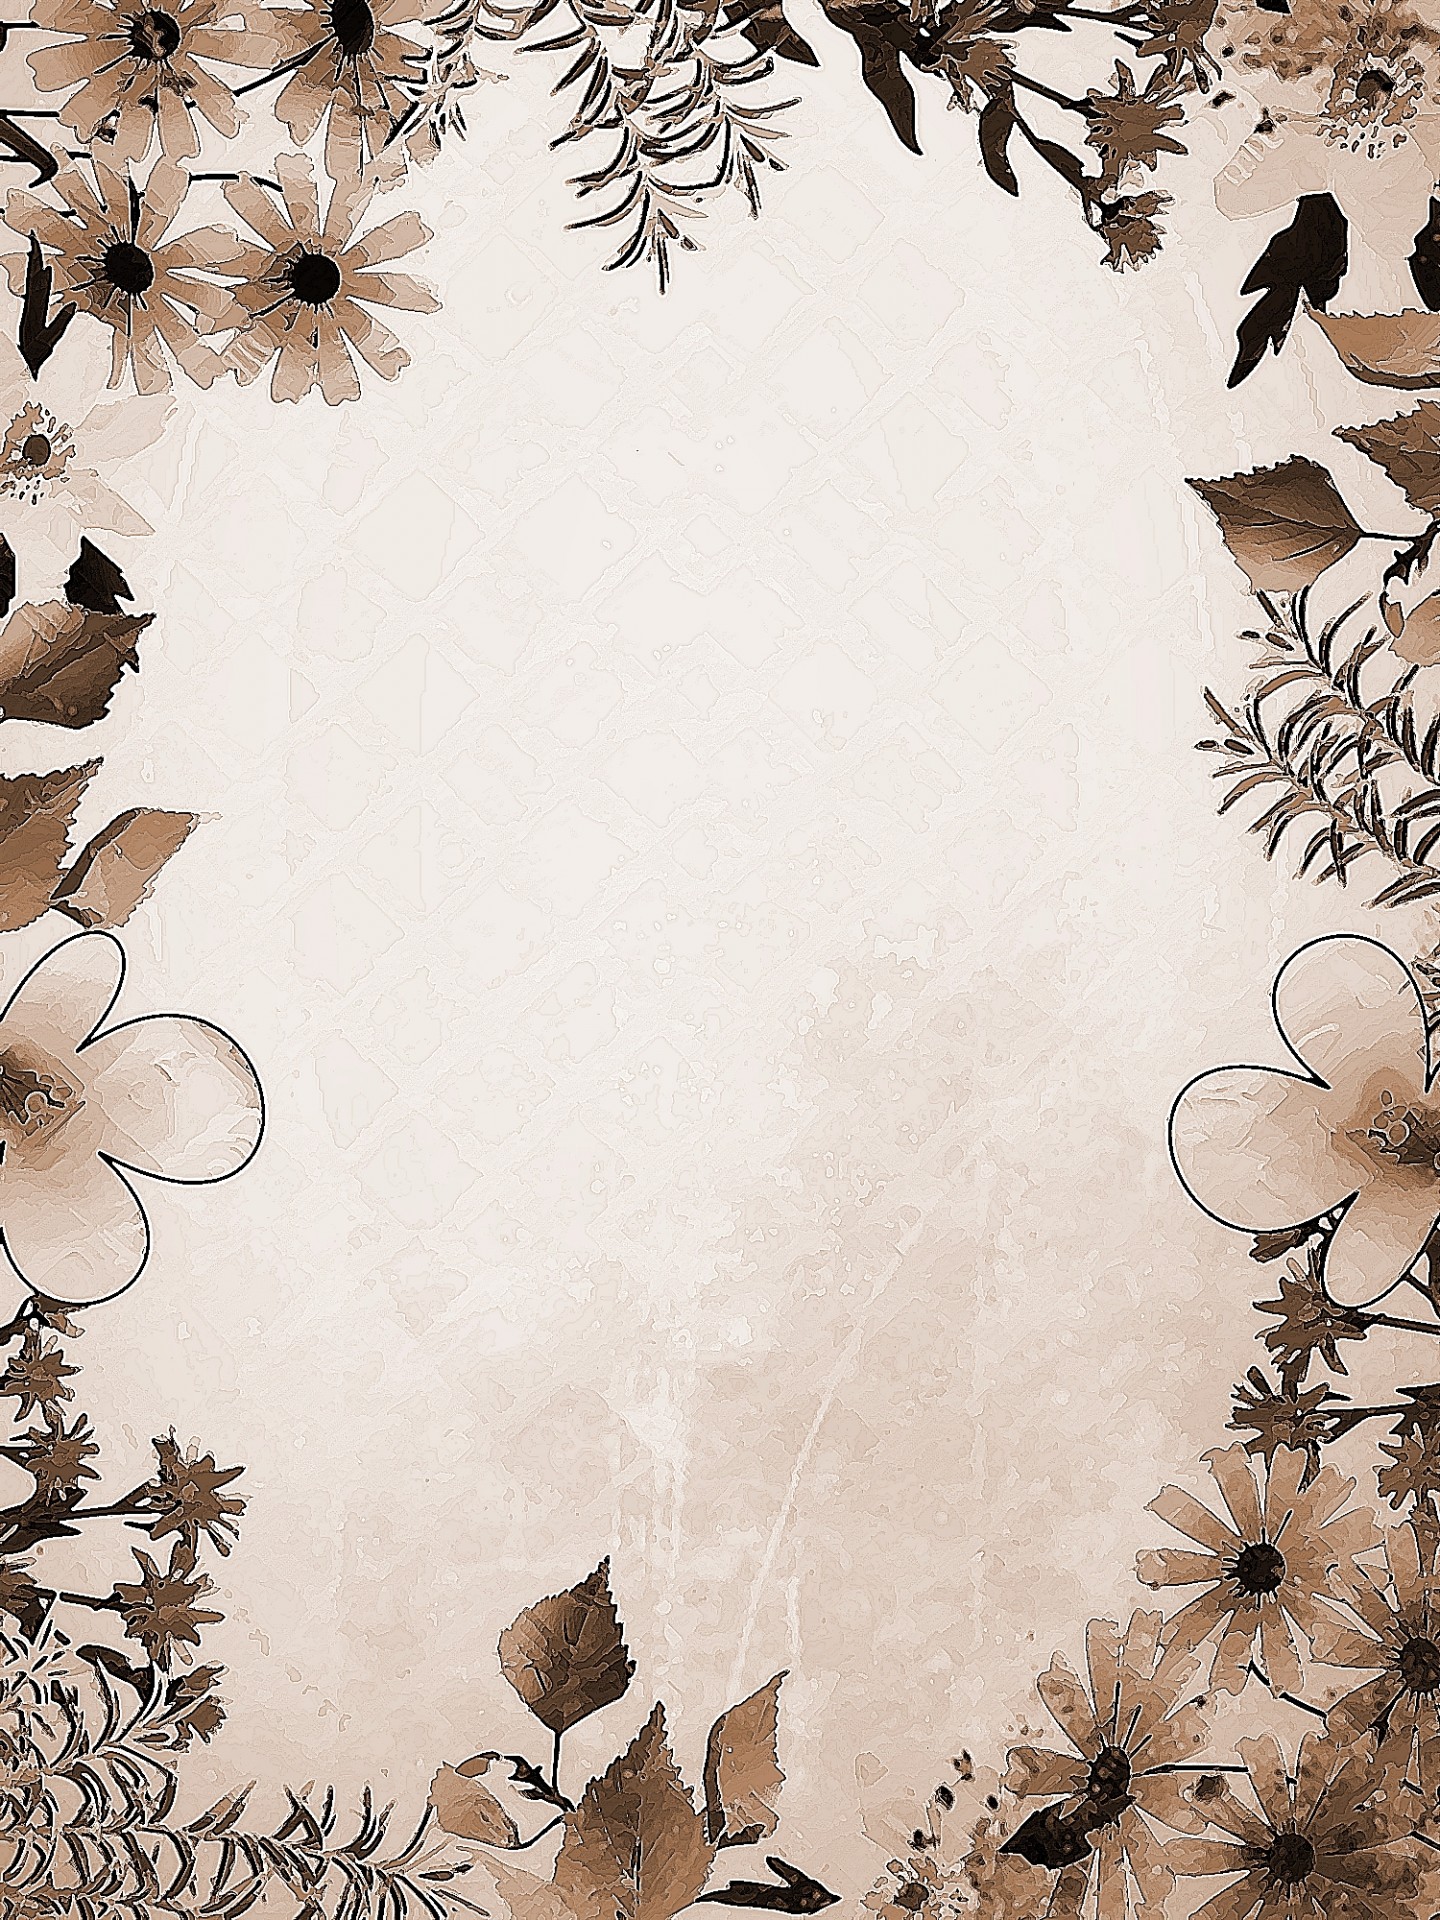 background abstract stationery free photo